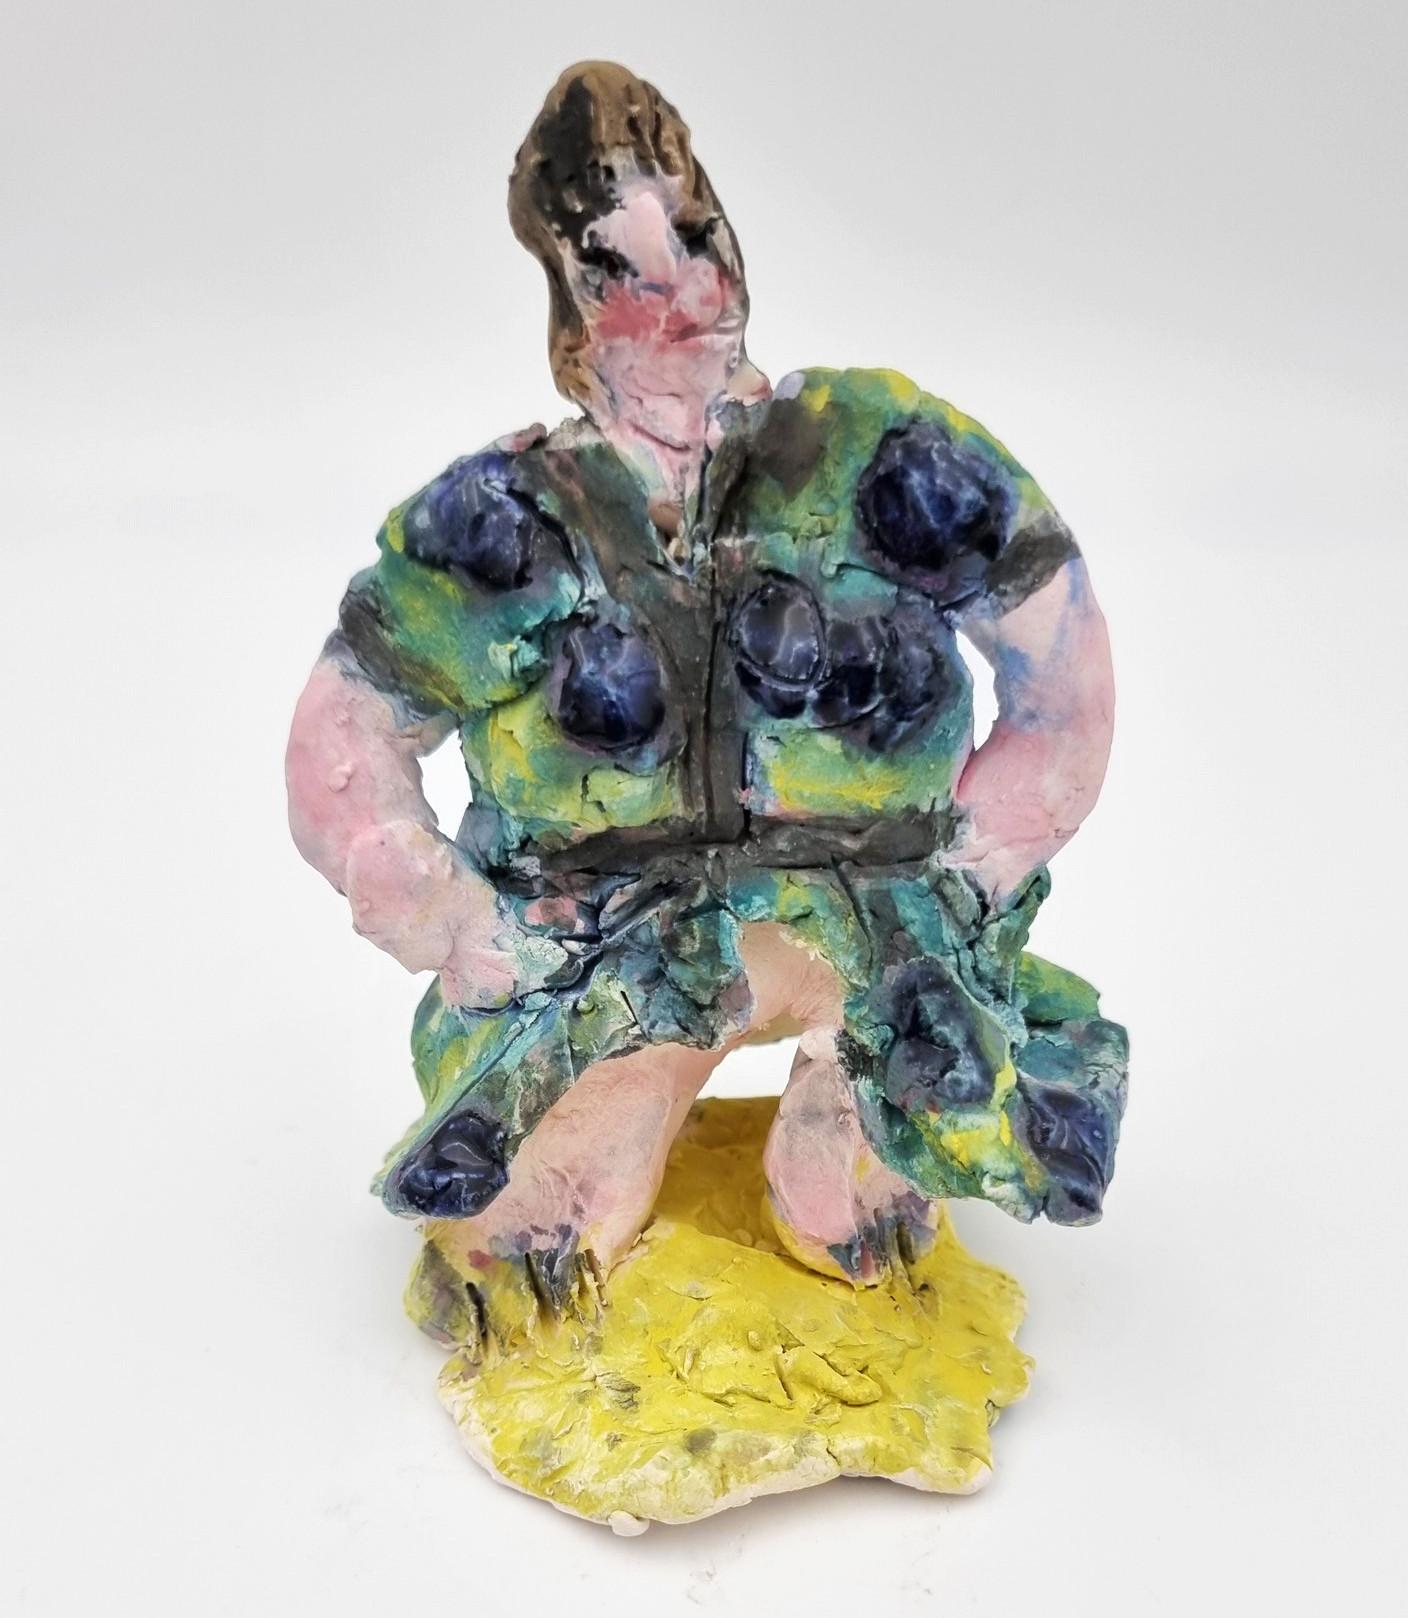 Fat Lady Acrobat (Circus, Whimsical, Viola Frey, Delicate, Playful, Barnum) - Sculpture by Ann Rothman